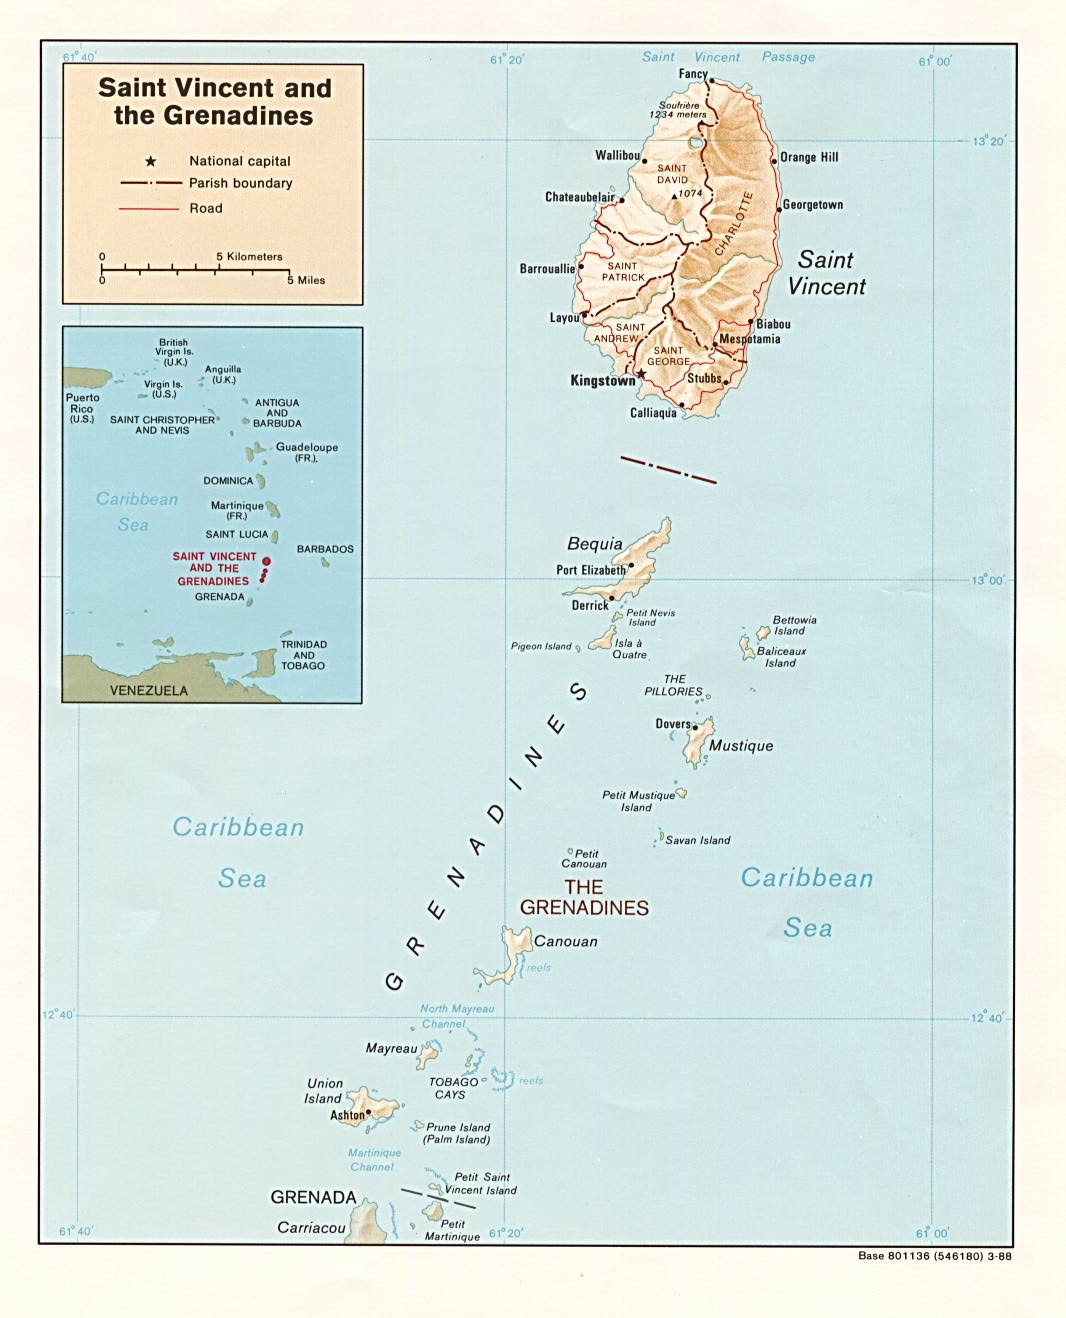 Saint Vincent and the Grenadines Shaded Relief Map